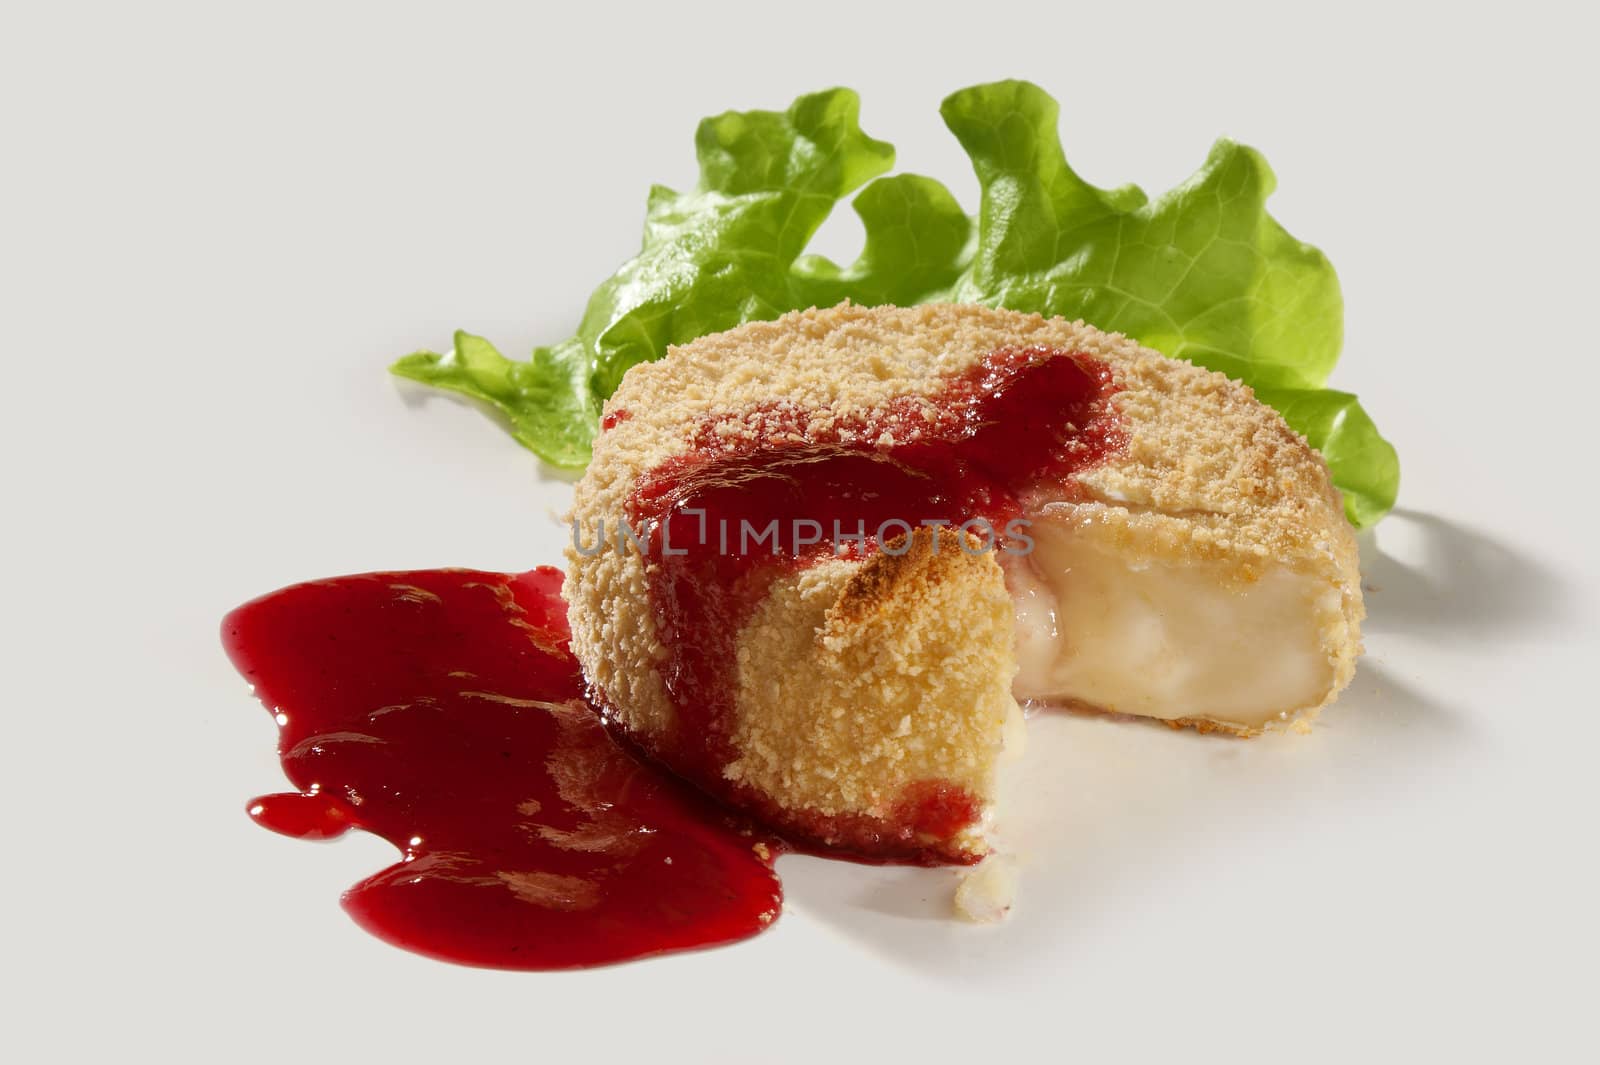 Baked camambert coated with breadcrumbs with lettuce and cowberries jam